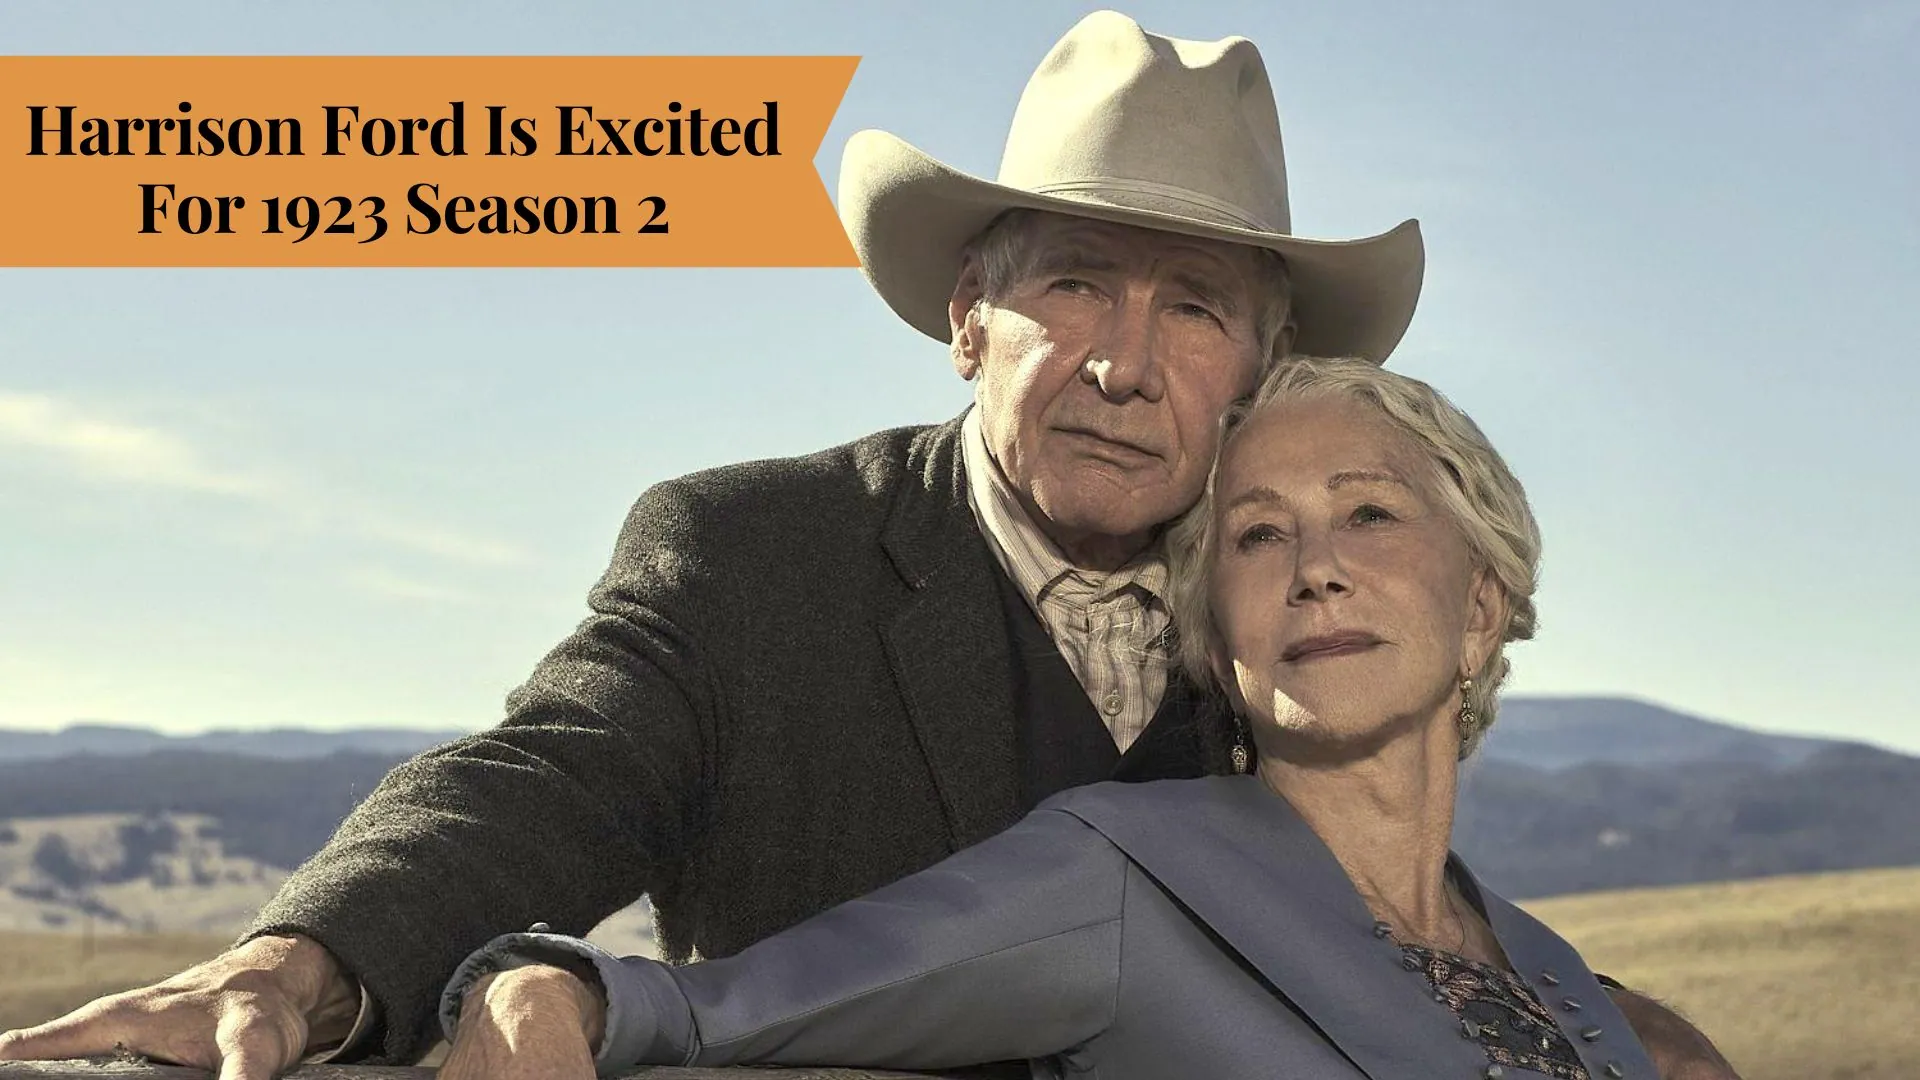 Harrison Ford Is Excited For 1923 Season 2 (Image credit thetimes)